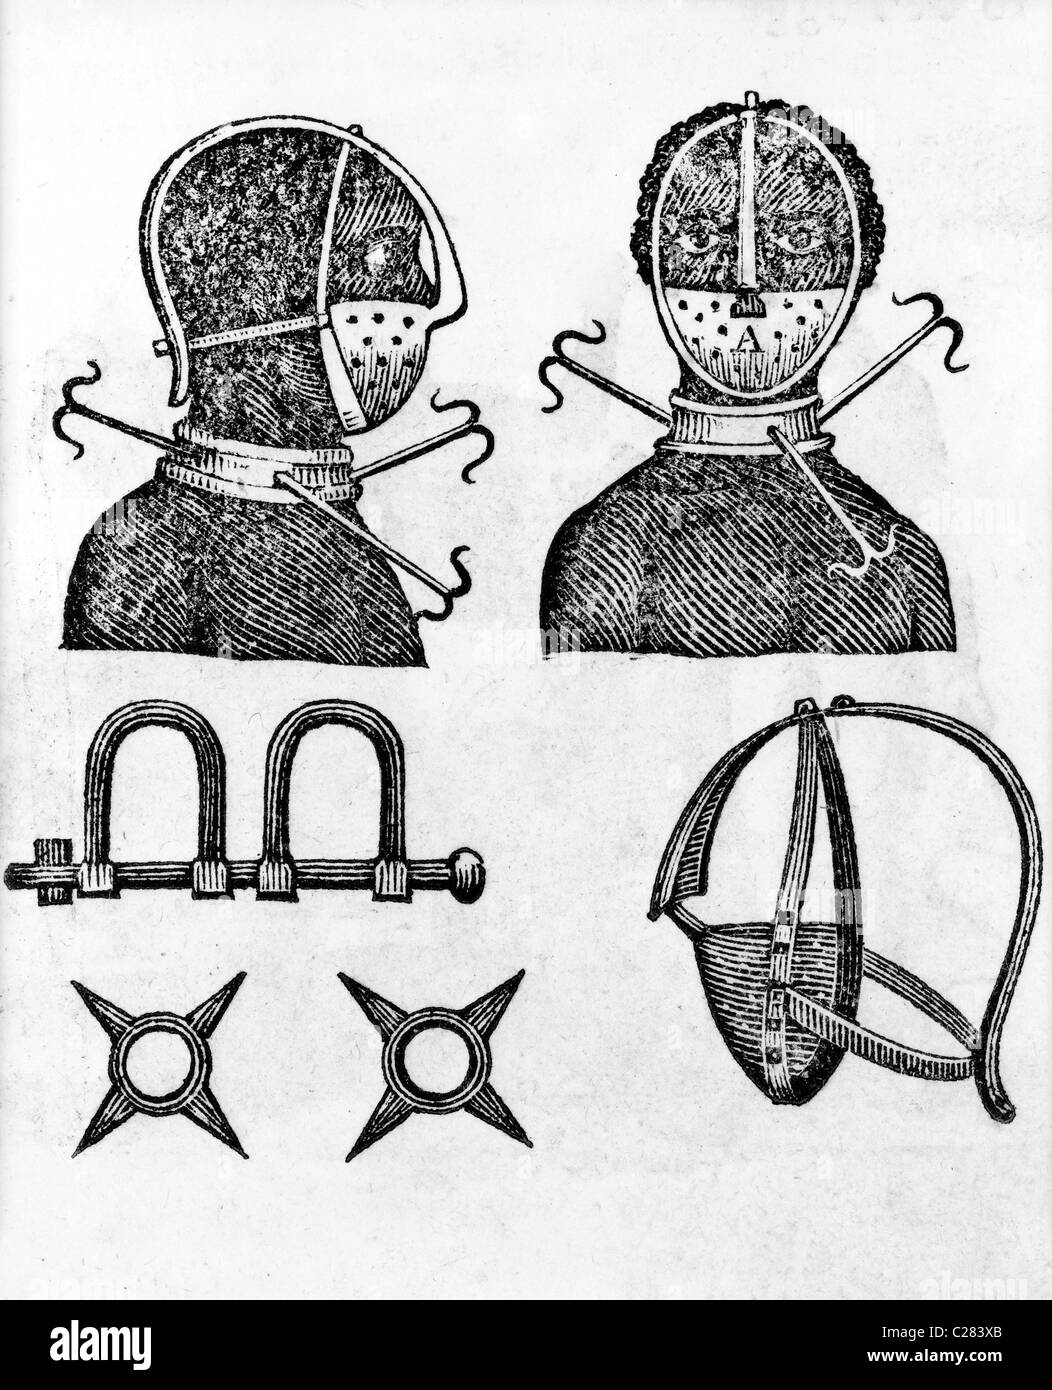 Iron mask, collar, leg shackles and spurs used to restrict slaves Stock Photo